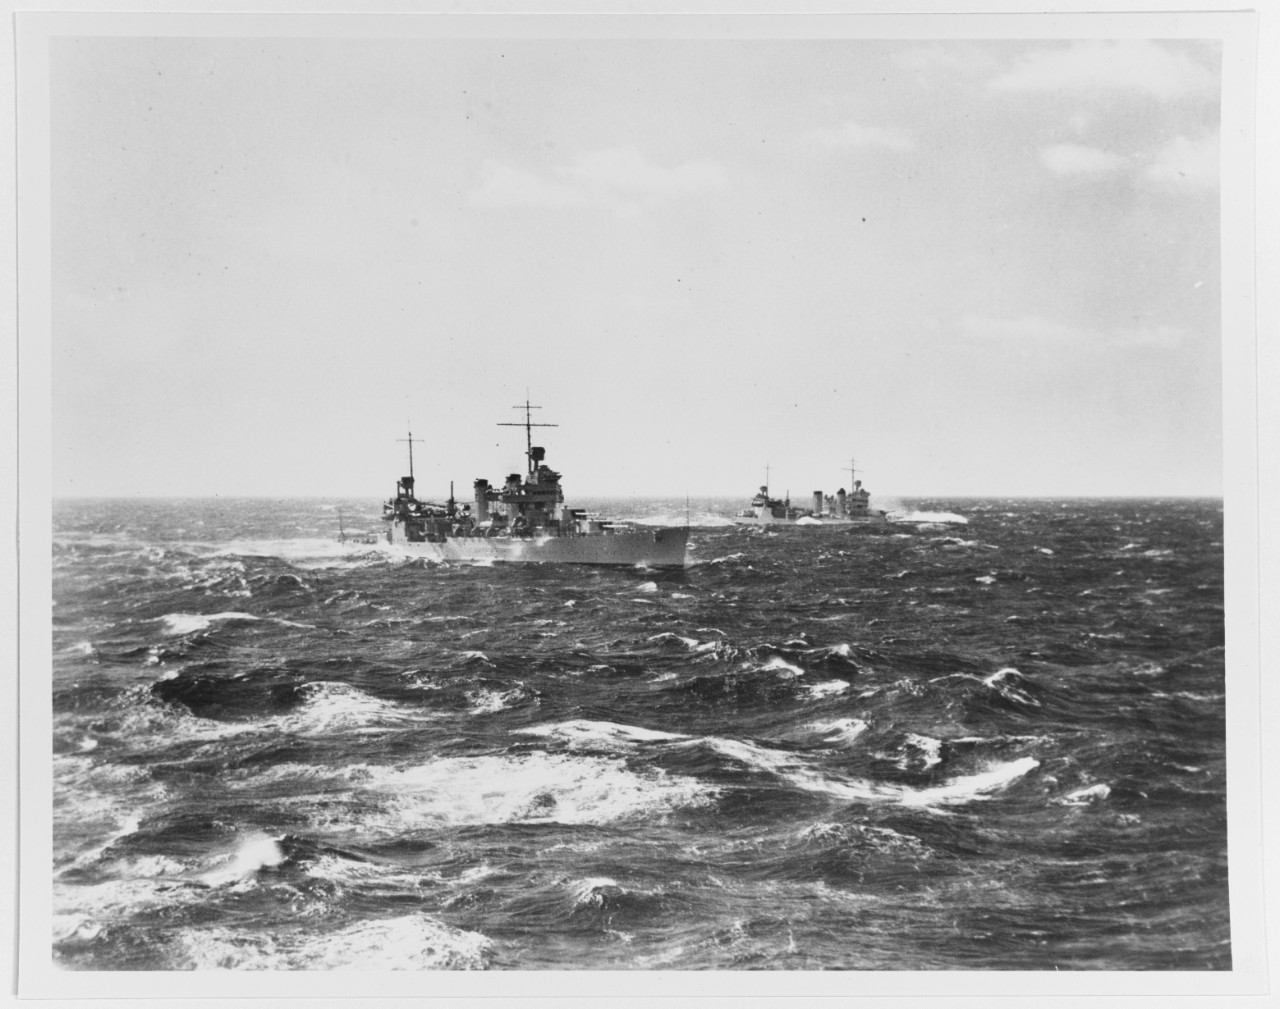 Photo #: NH 83591  Cruiser Division Seven's South American Cruise, 1939